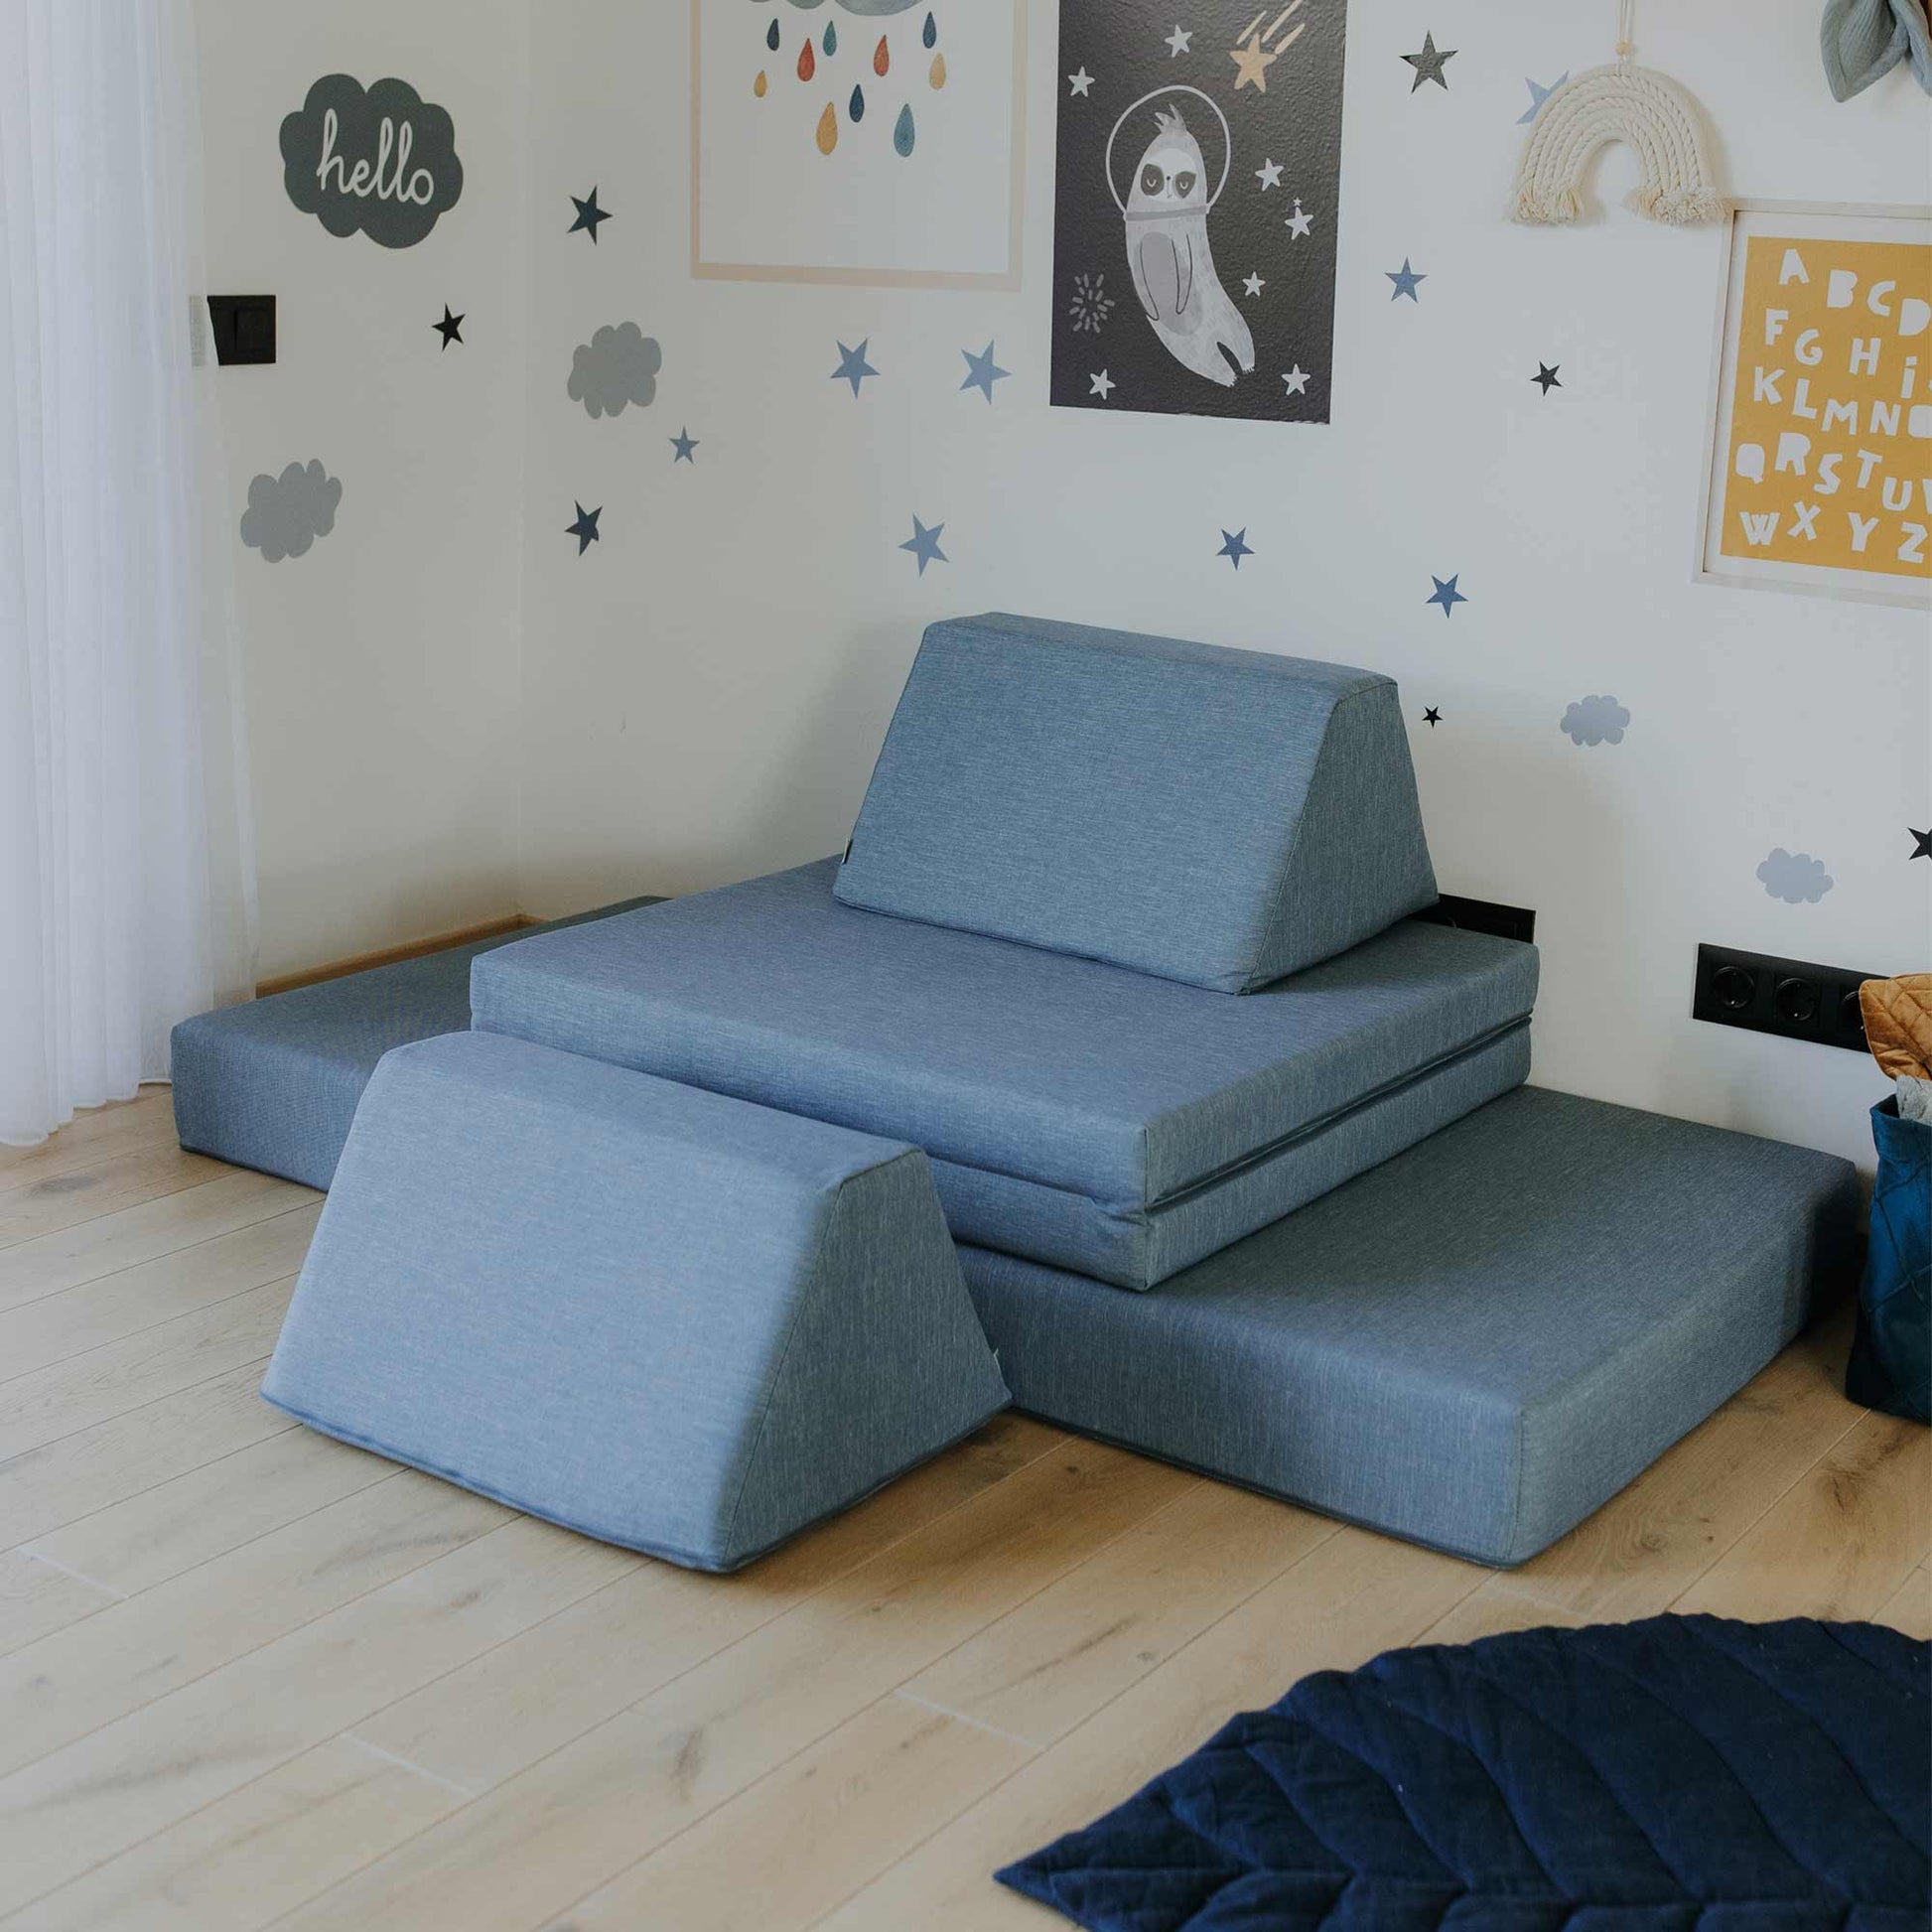 A turquoise Monboxy soft blocks activity couch for kids